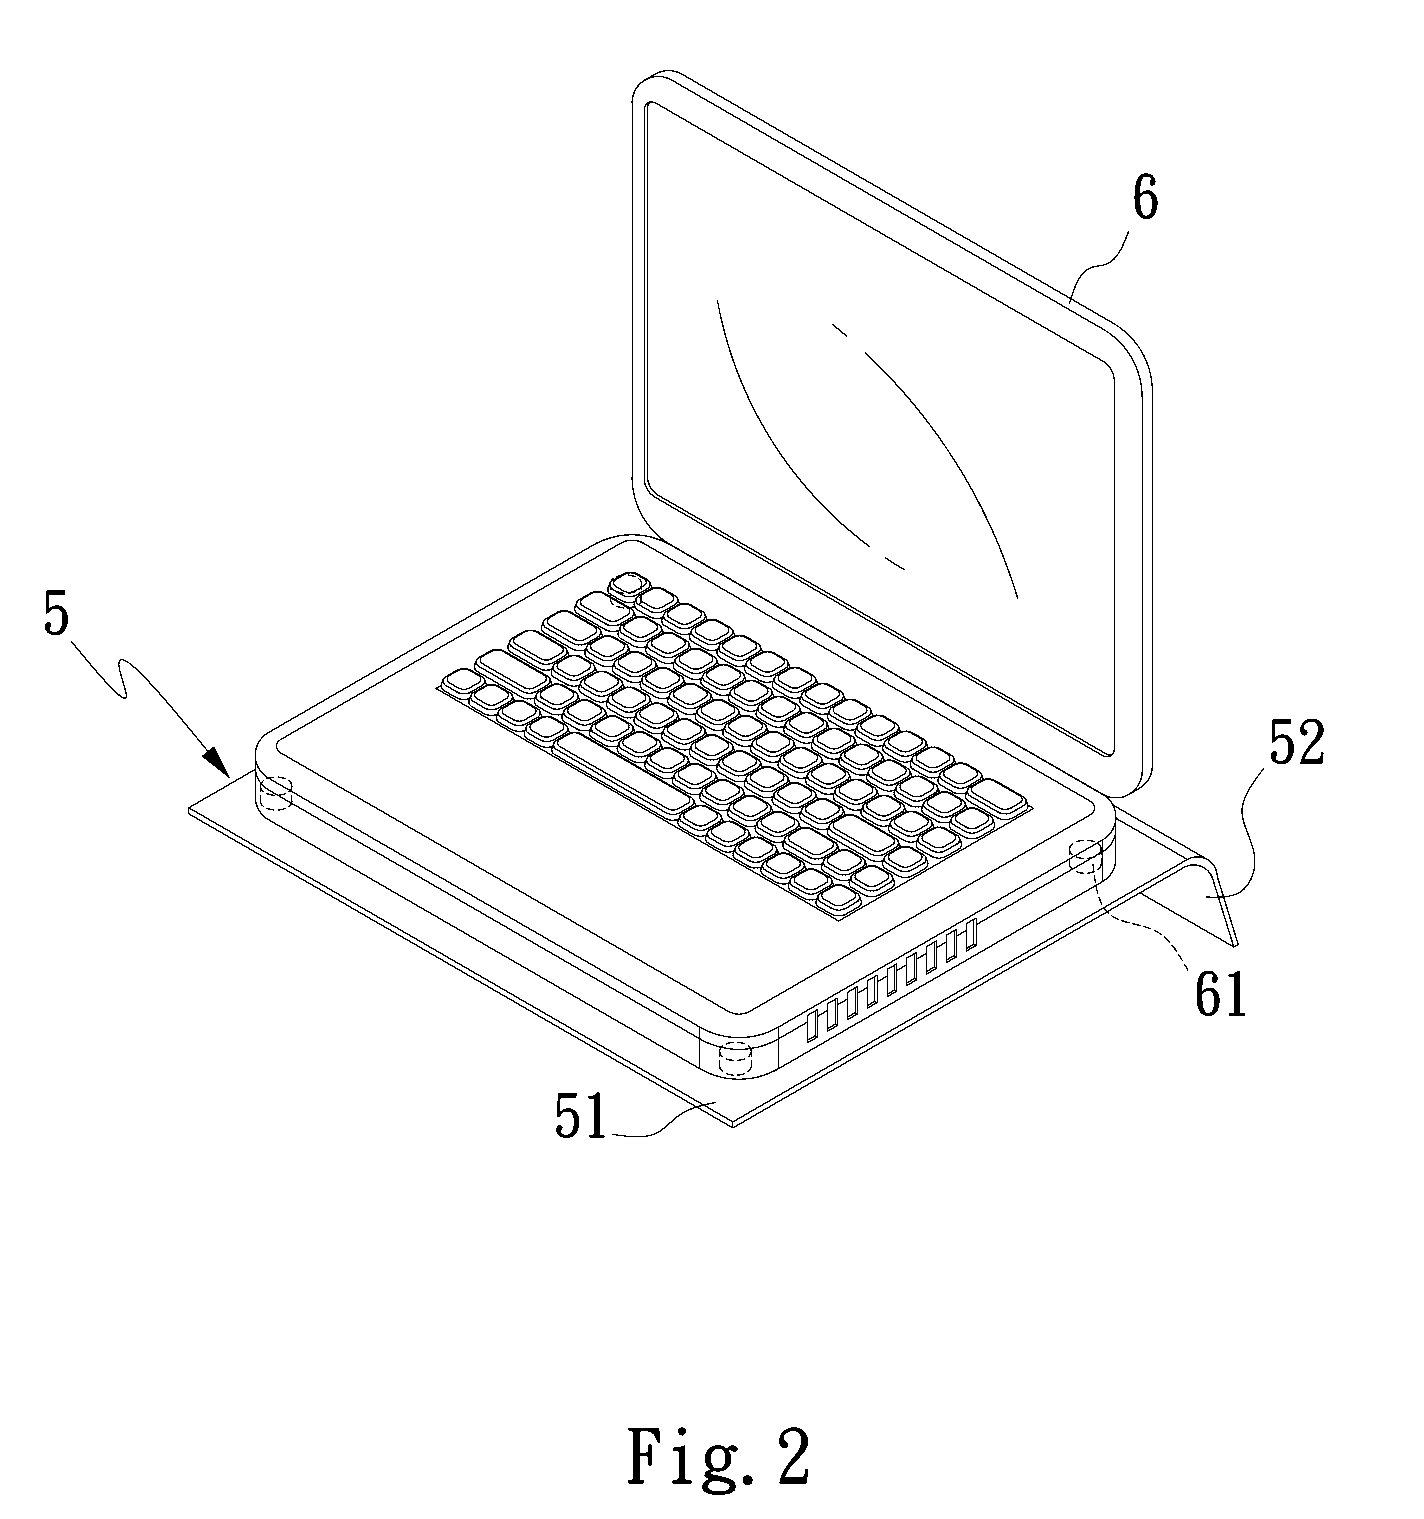 Heat dissipating pad structure for notebook computer